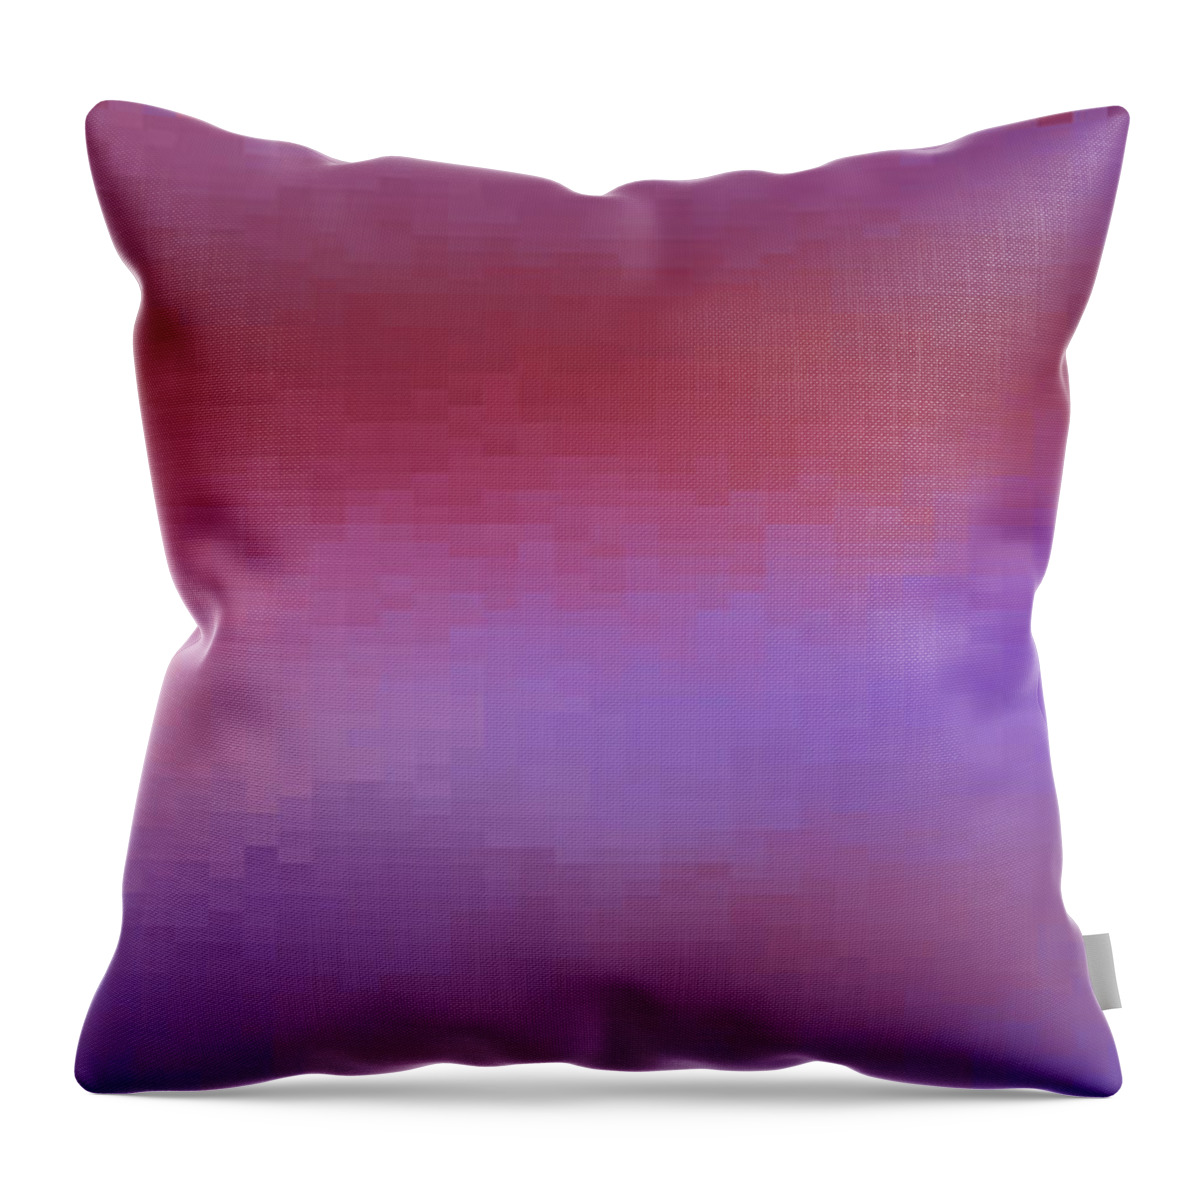 Rithmart Abstract Fade Fading Pixels Noise Clouds Organic Shades Random Computer Digital Shapes Changing Chester Directions Large Pixels Shades Throw Pillow featuring the digital art 18x9.137-#rithmart by Gareth Lewis